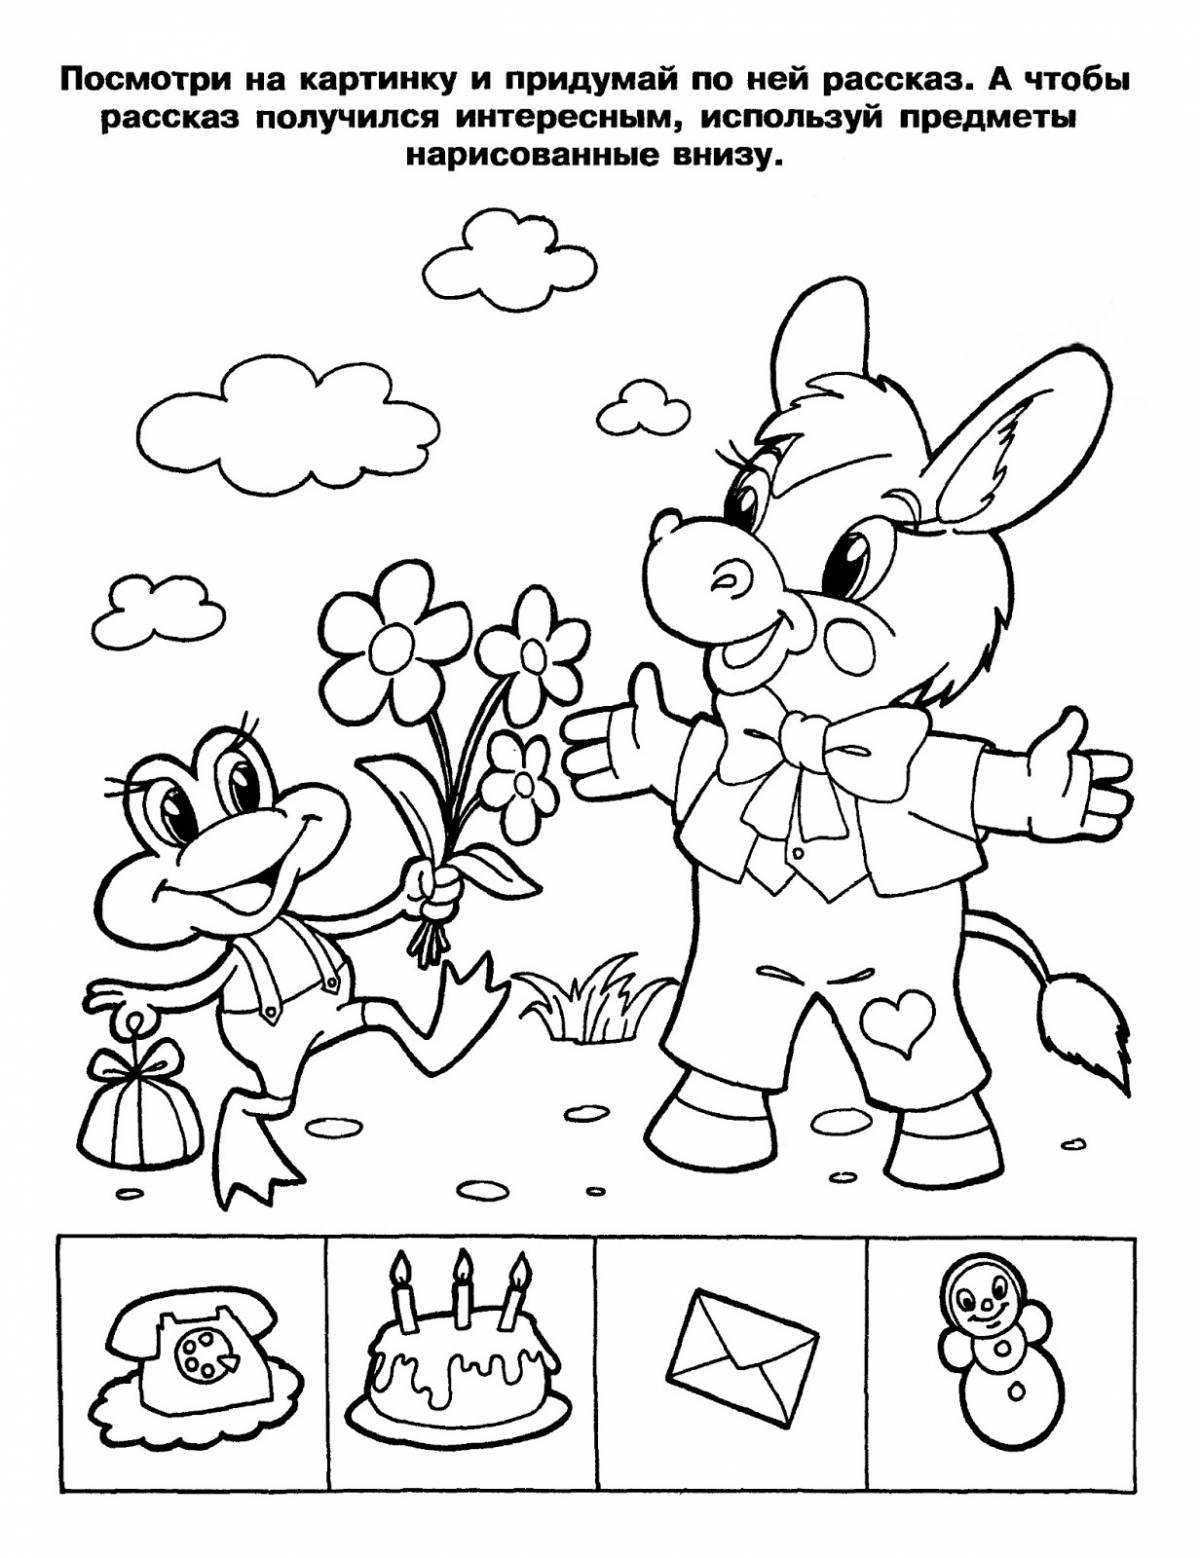 Adorable fun coloring book for kids 5-6 years old